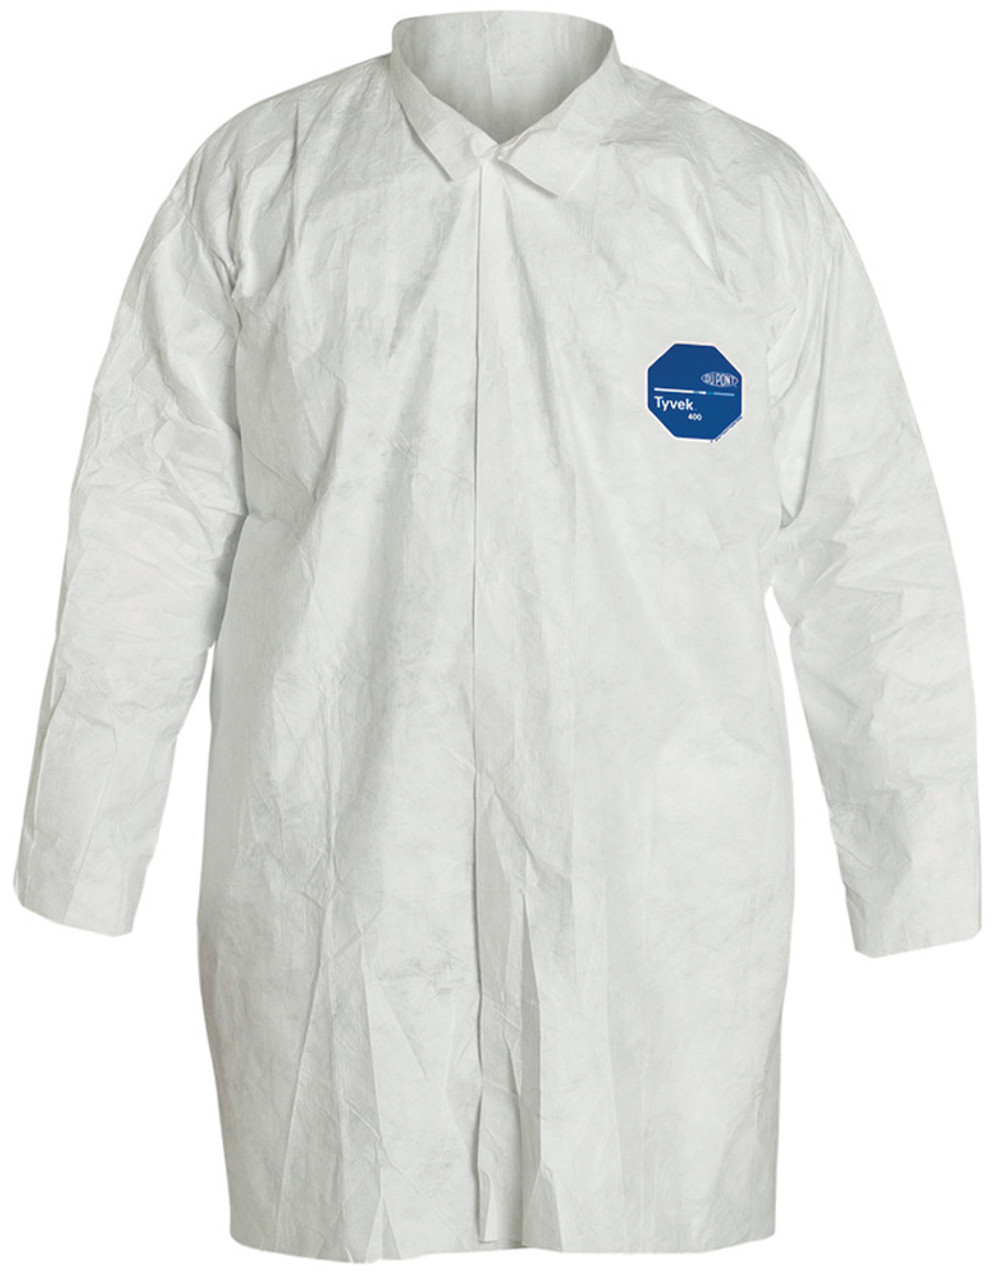 DuPont™ TY210S WH Tyvek® 400 Frocks w/ Serged Seams and open cuffs